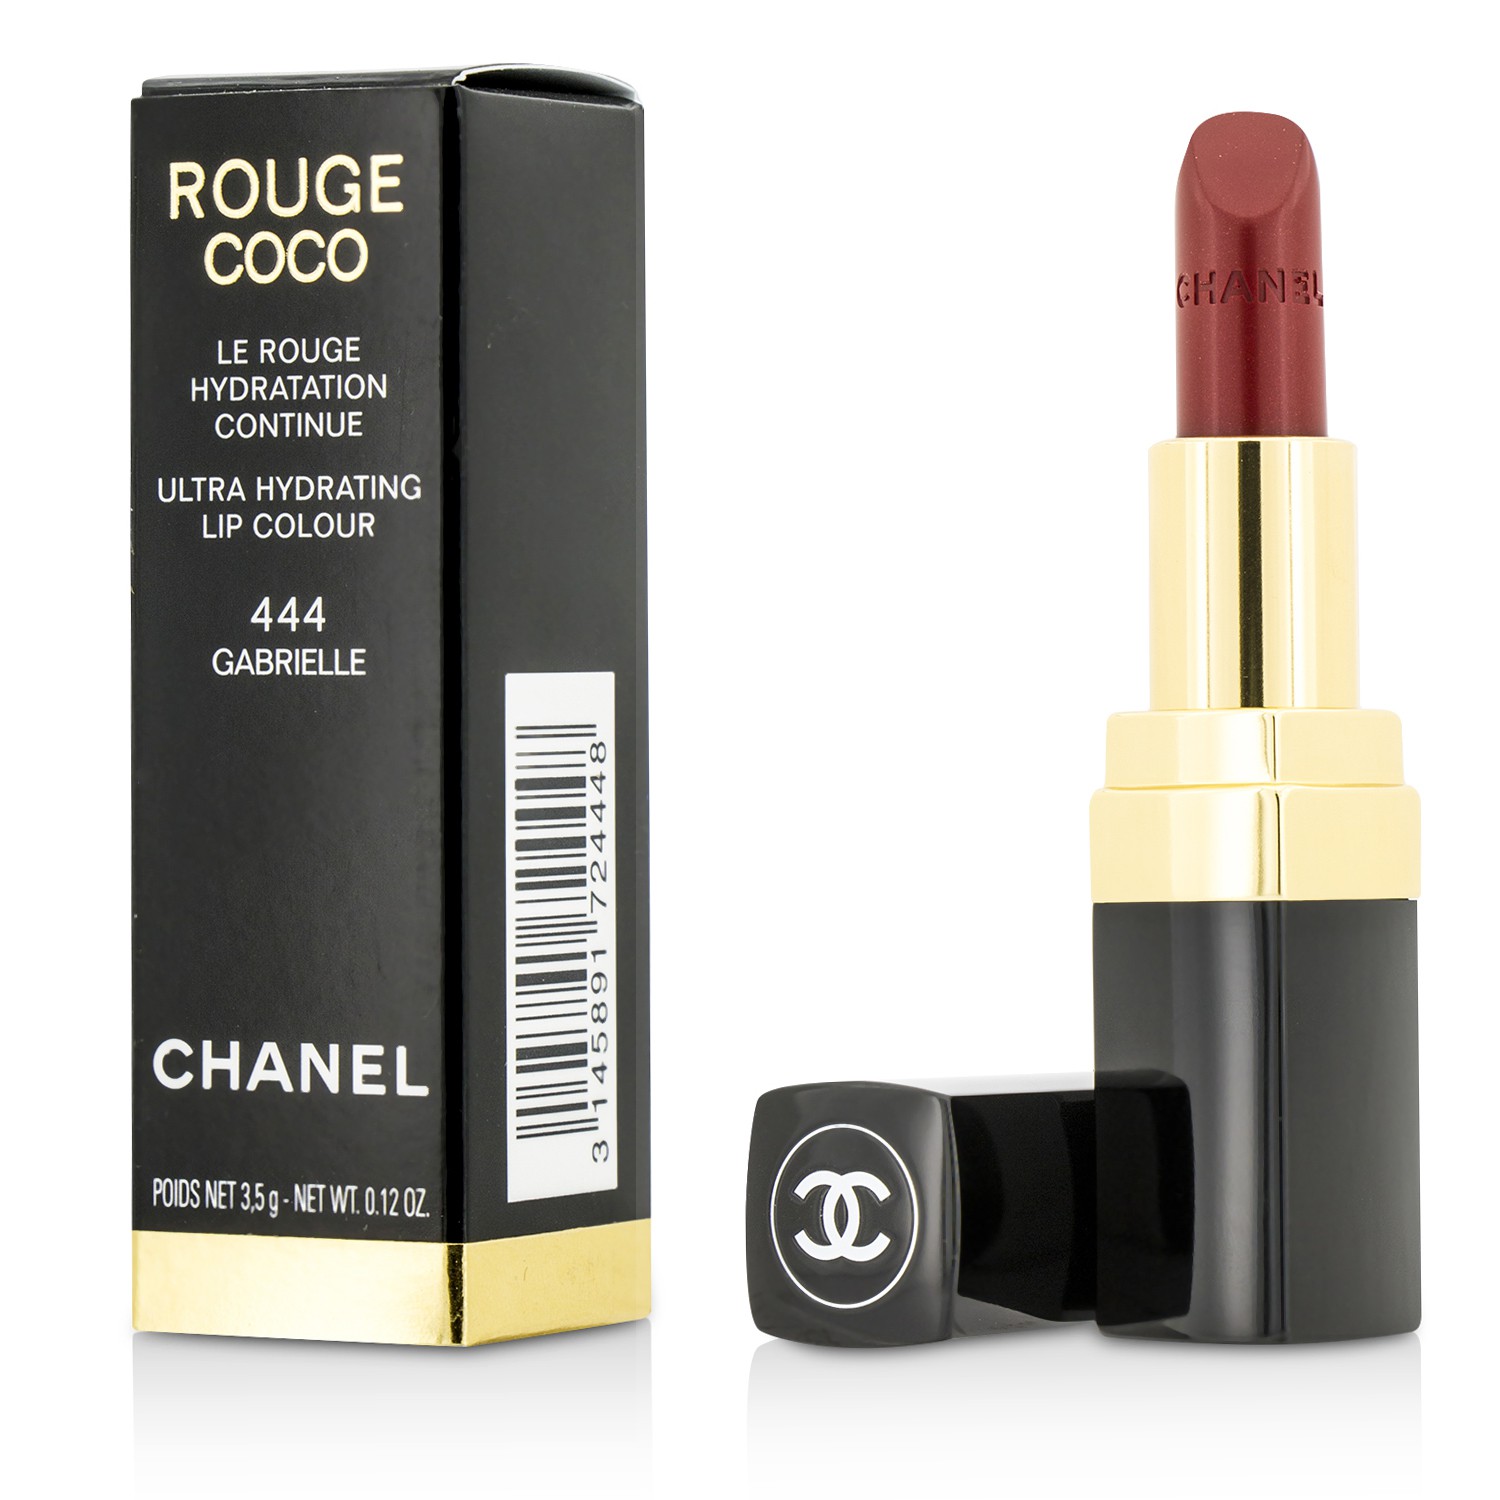 Chanel Rouge Coco Ultra Hydrating Lip Colour, Gabrielle 444 - 0.12 oz tube